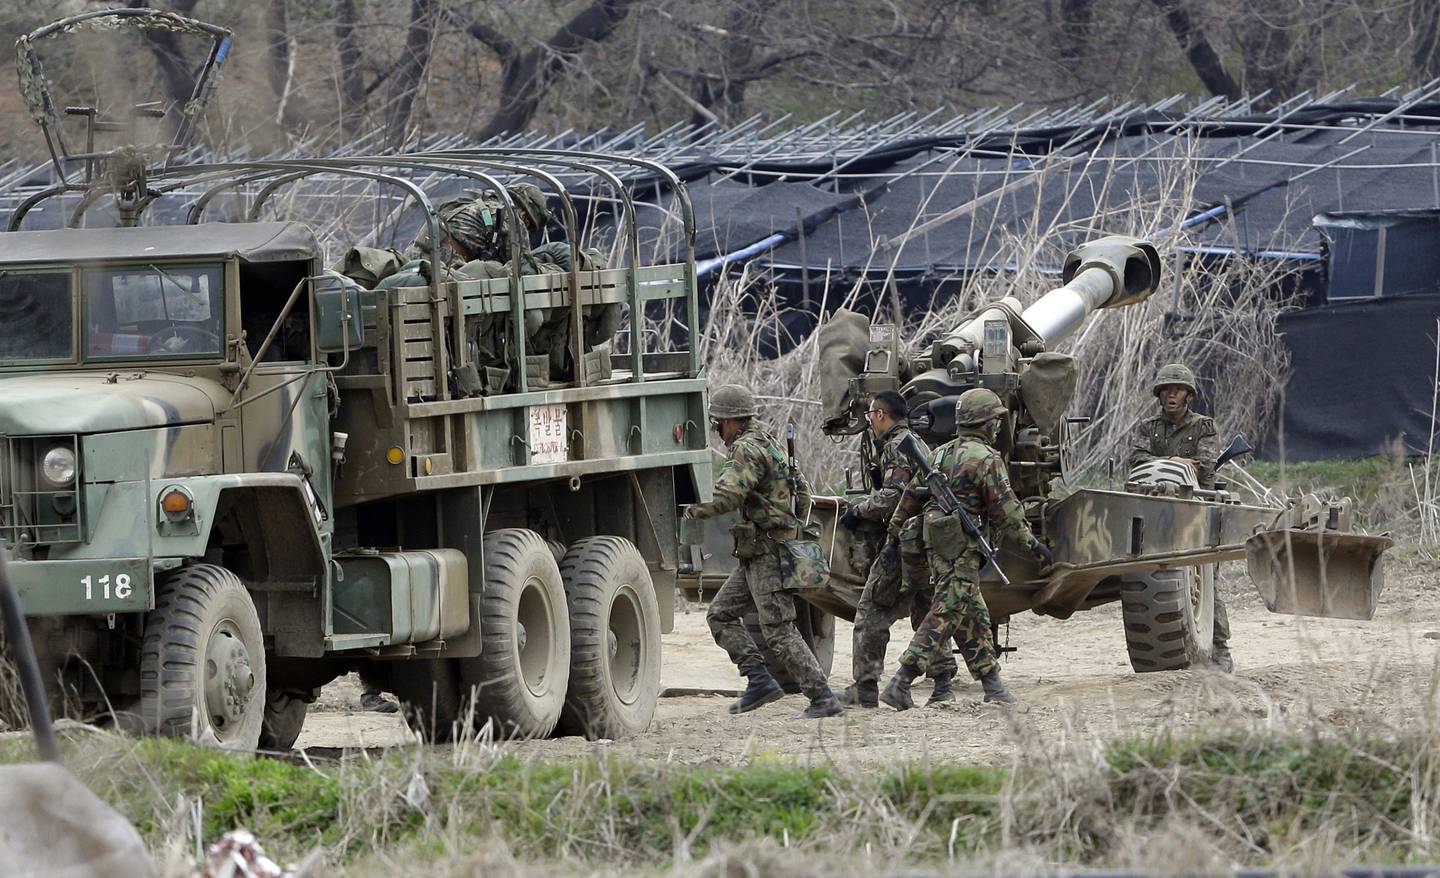 South Korean soldiers prepare 155 mm howitzers during their military exercise in the border city between two Koreas, Paju, north of Seoul, South Korea, on April 18, 2013.